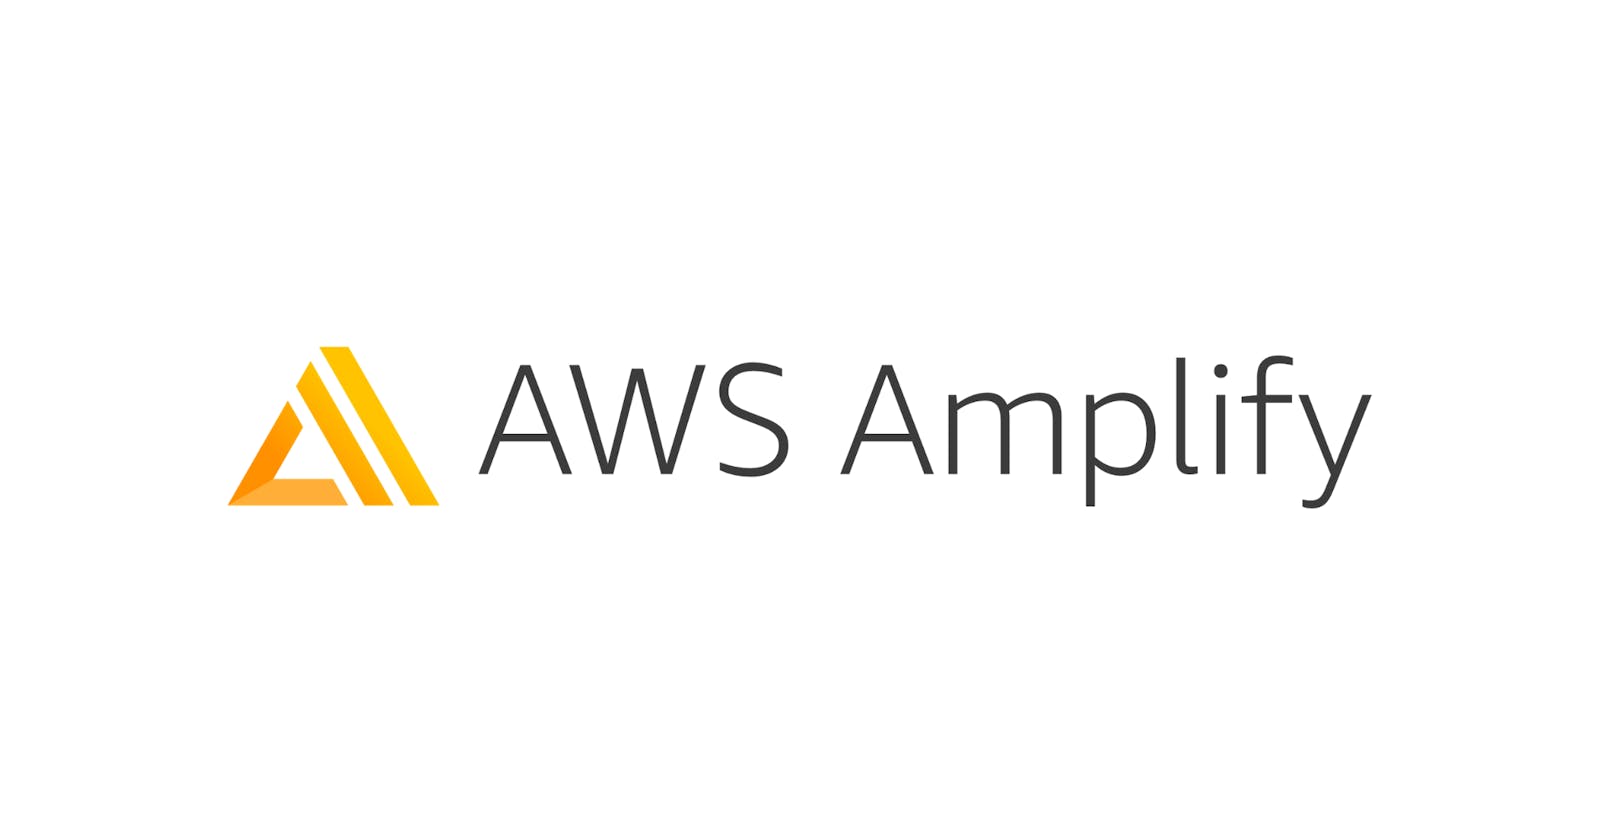 How to deploy your websites with AWS Amplify?